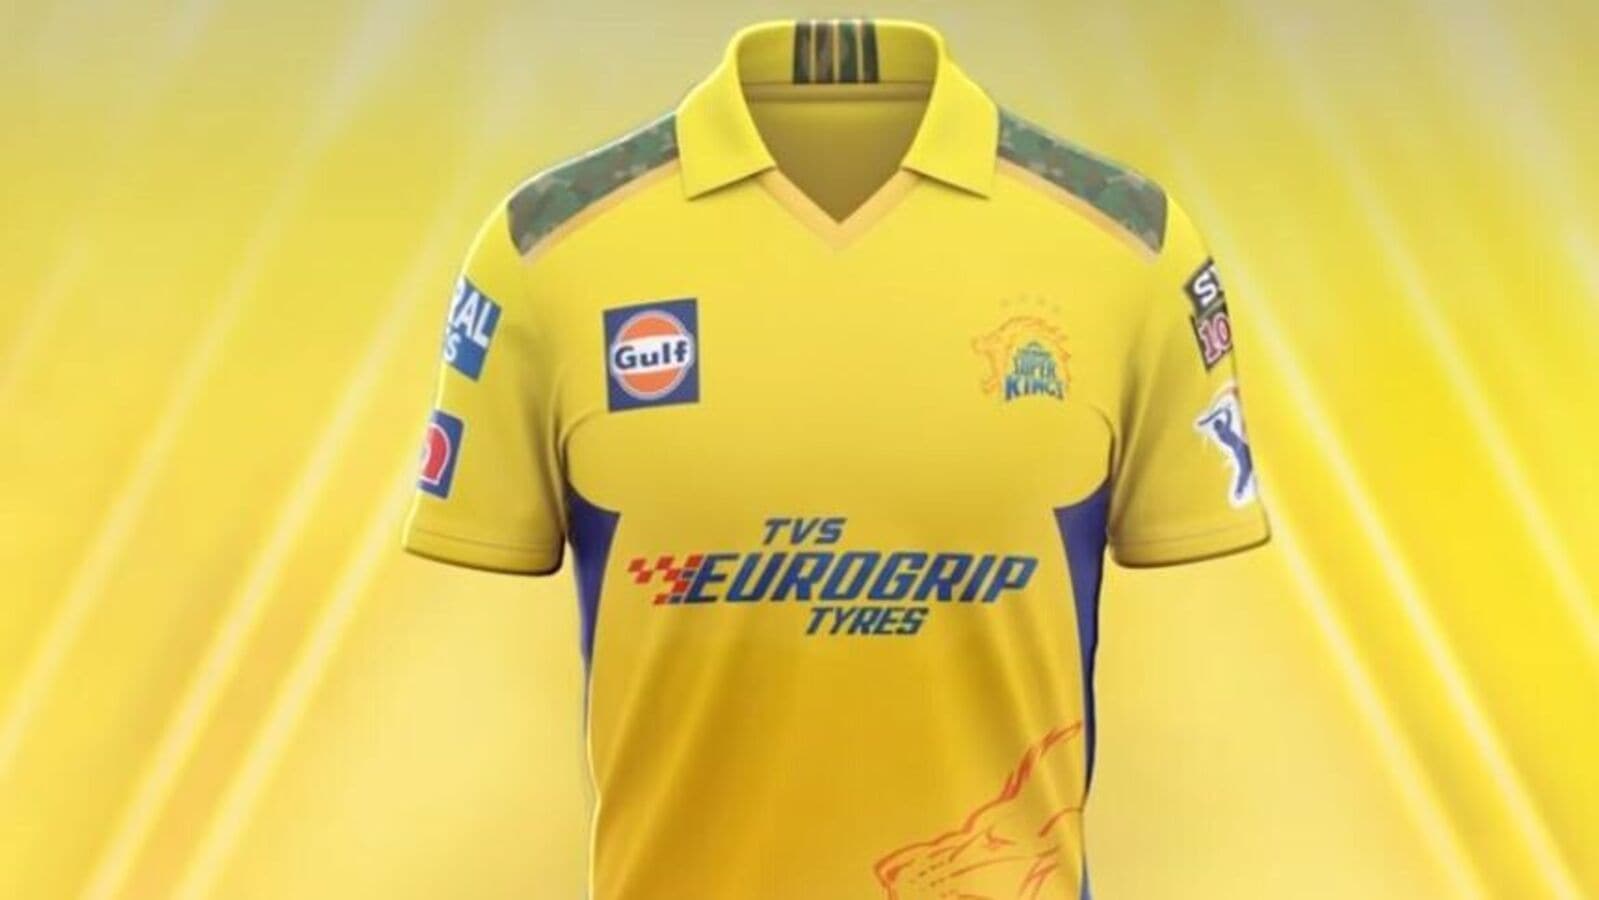 IPL 2022: WATCH – CSK unveil their jersey with new sponsor for